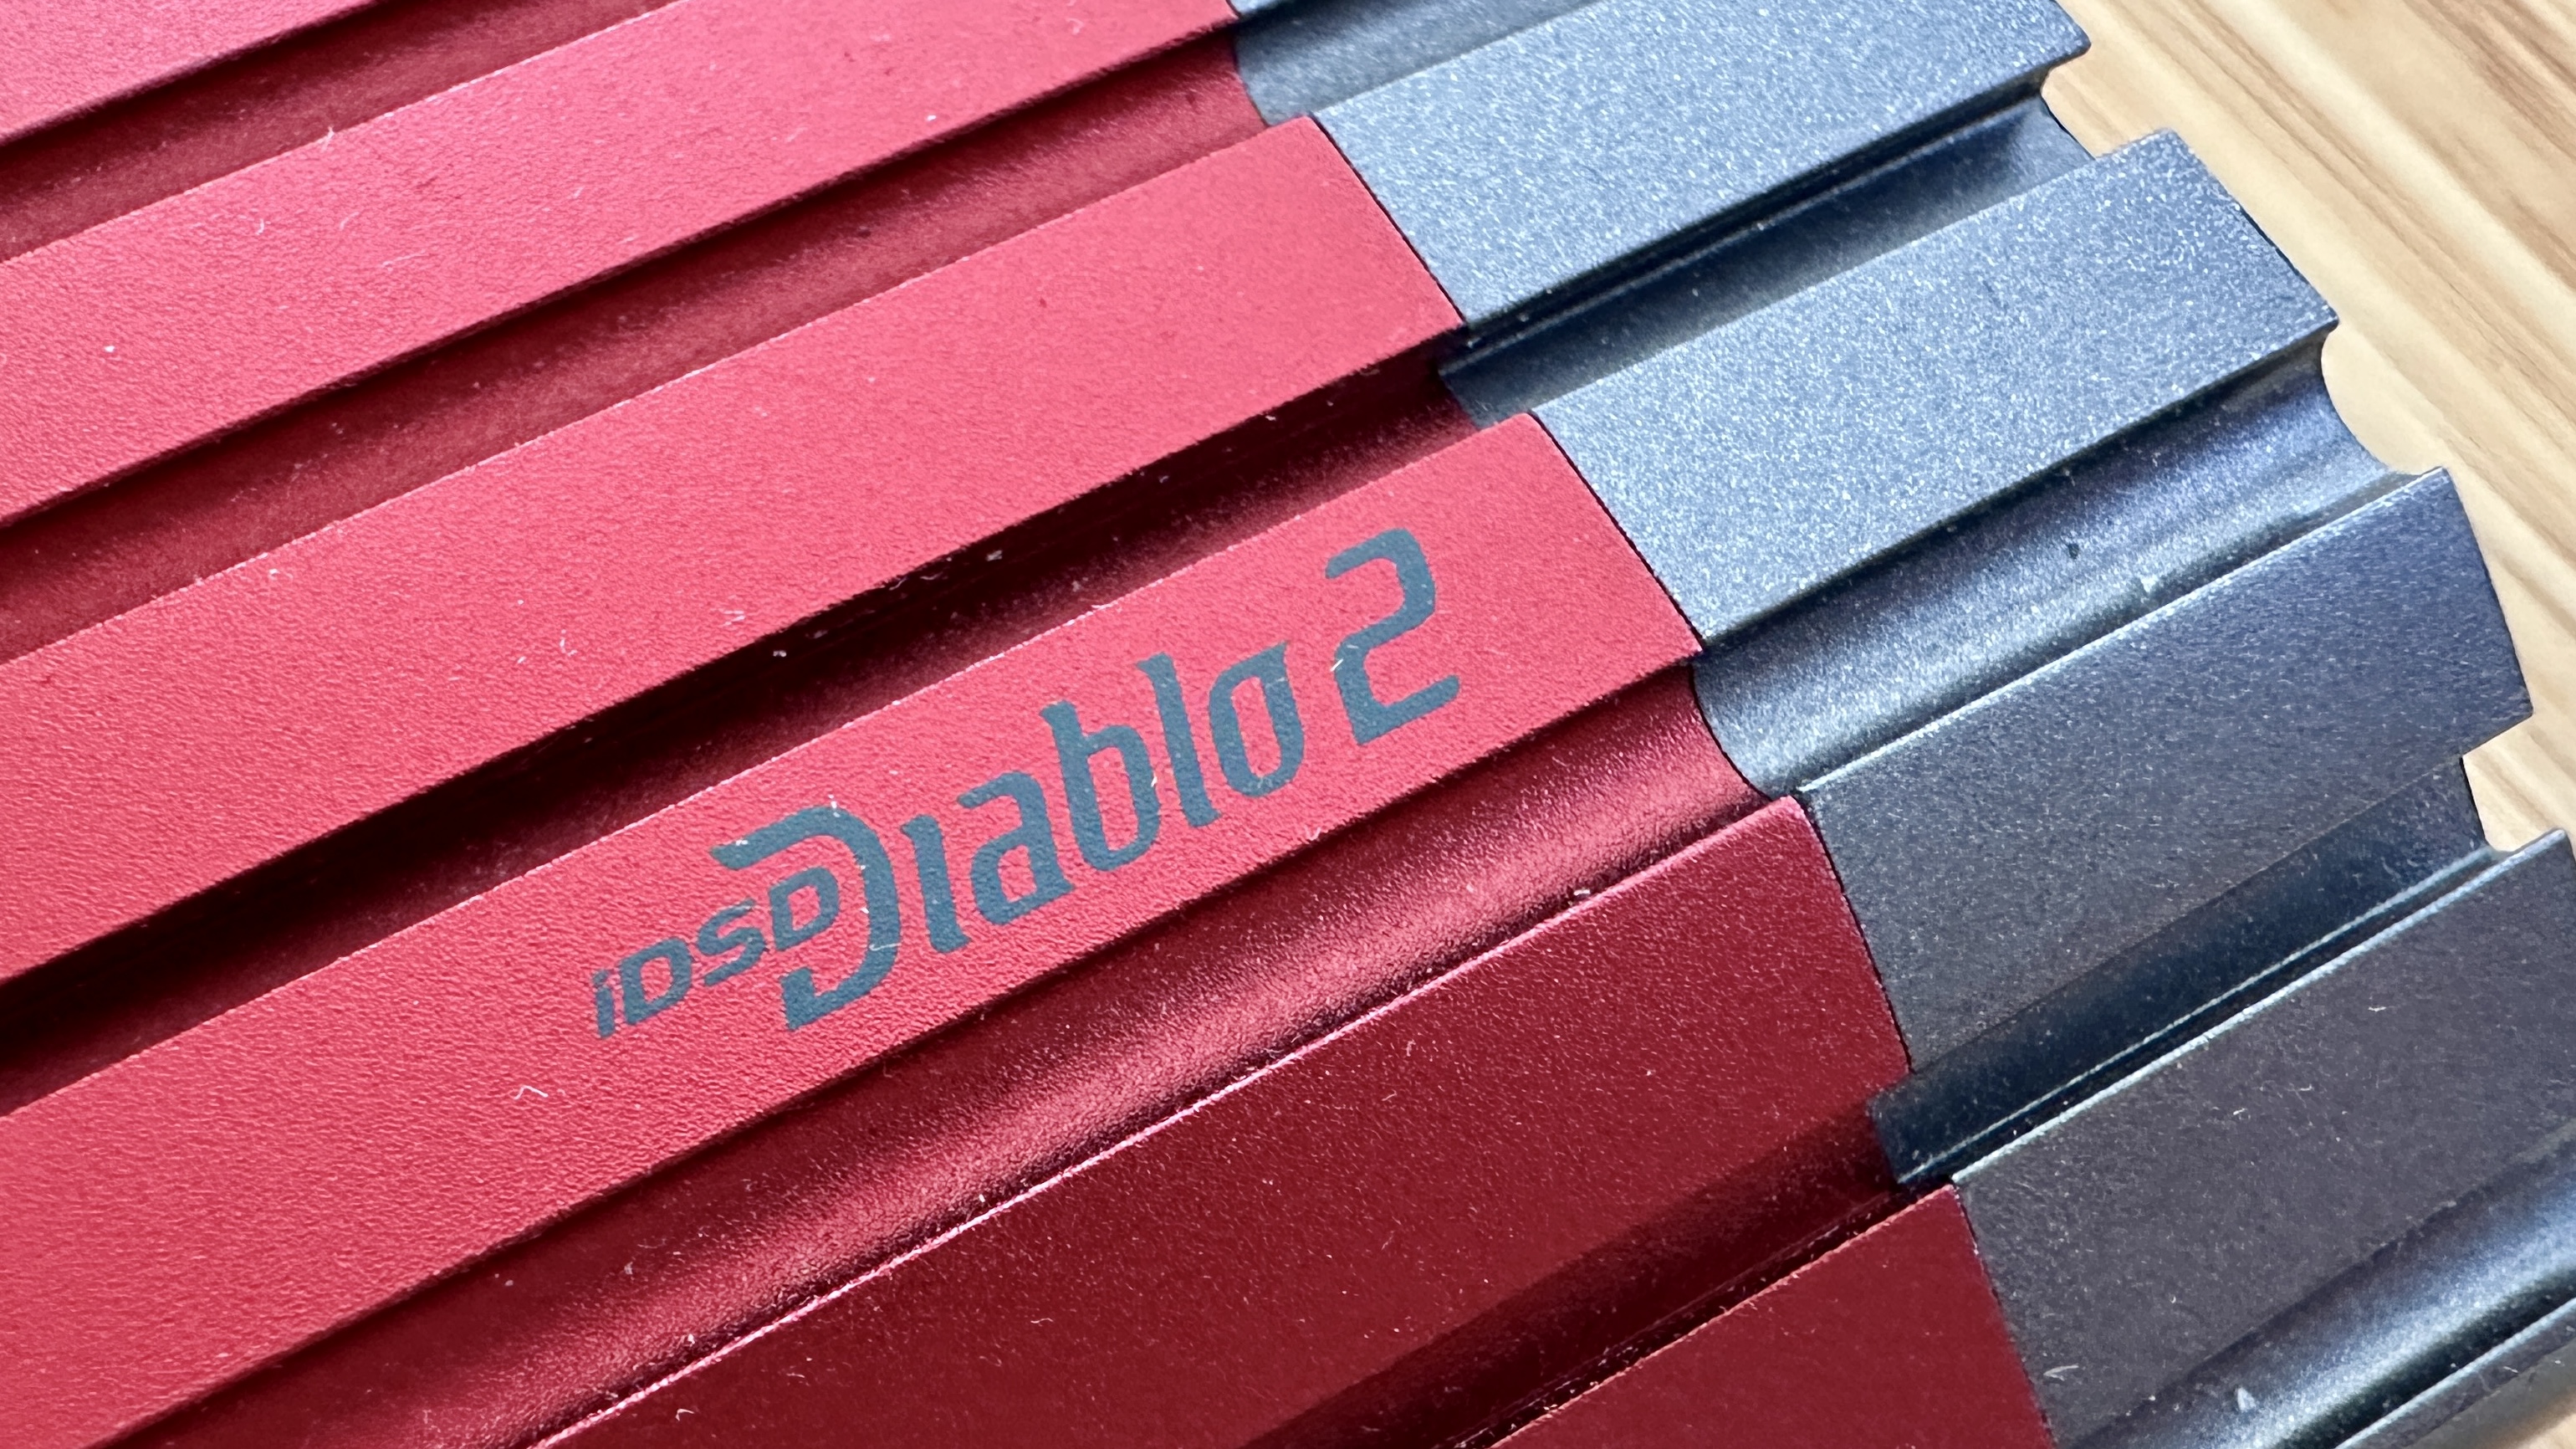 iFi iDSD Diablo of the branding on the casework, silver on red